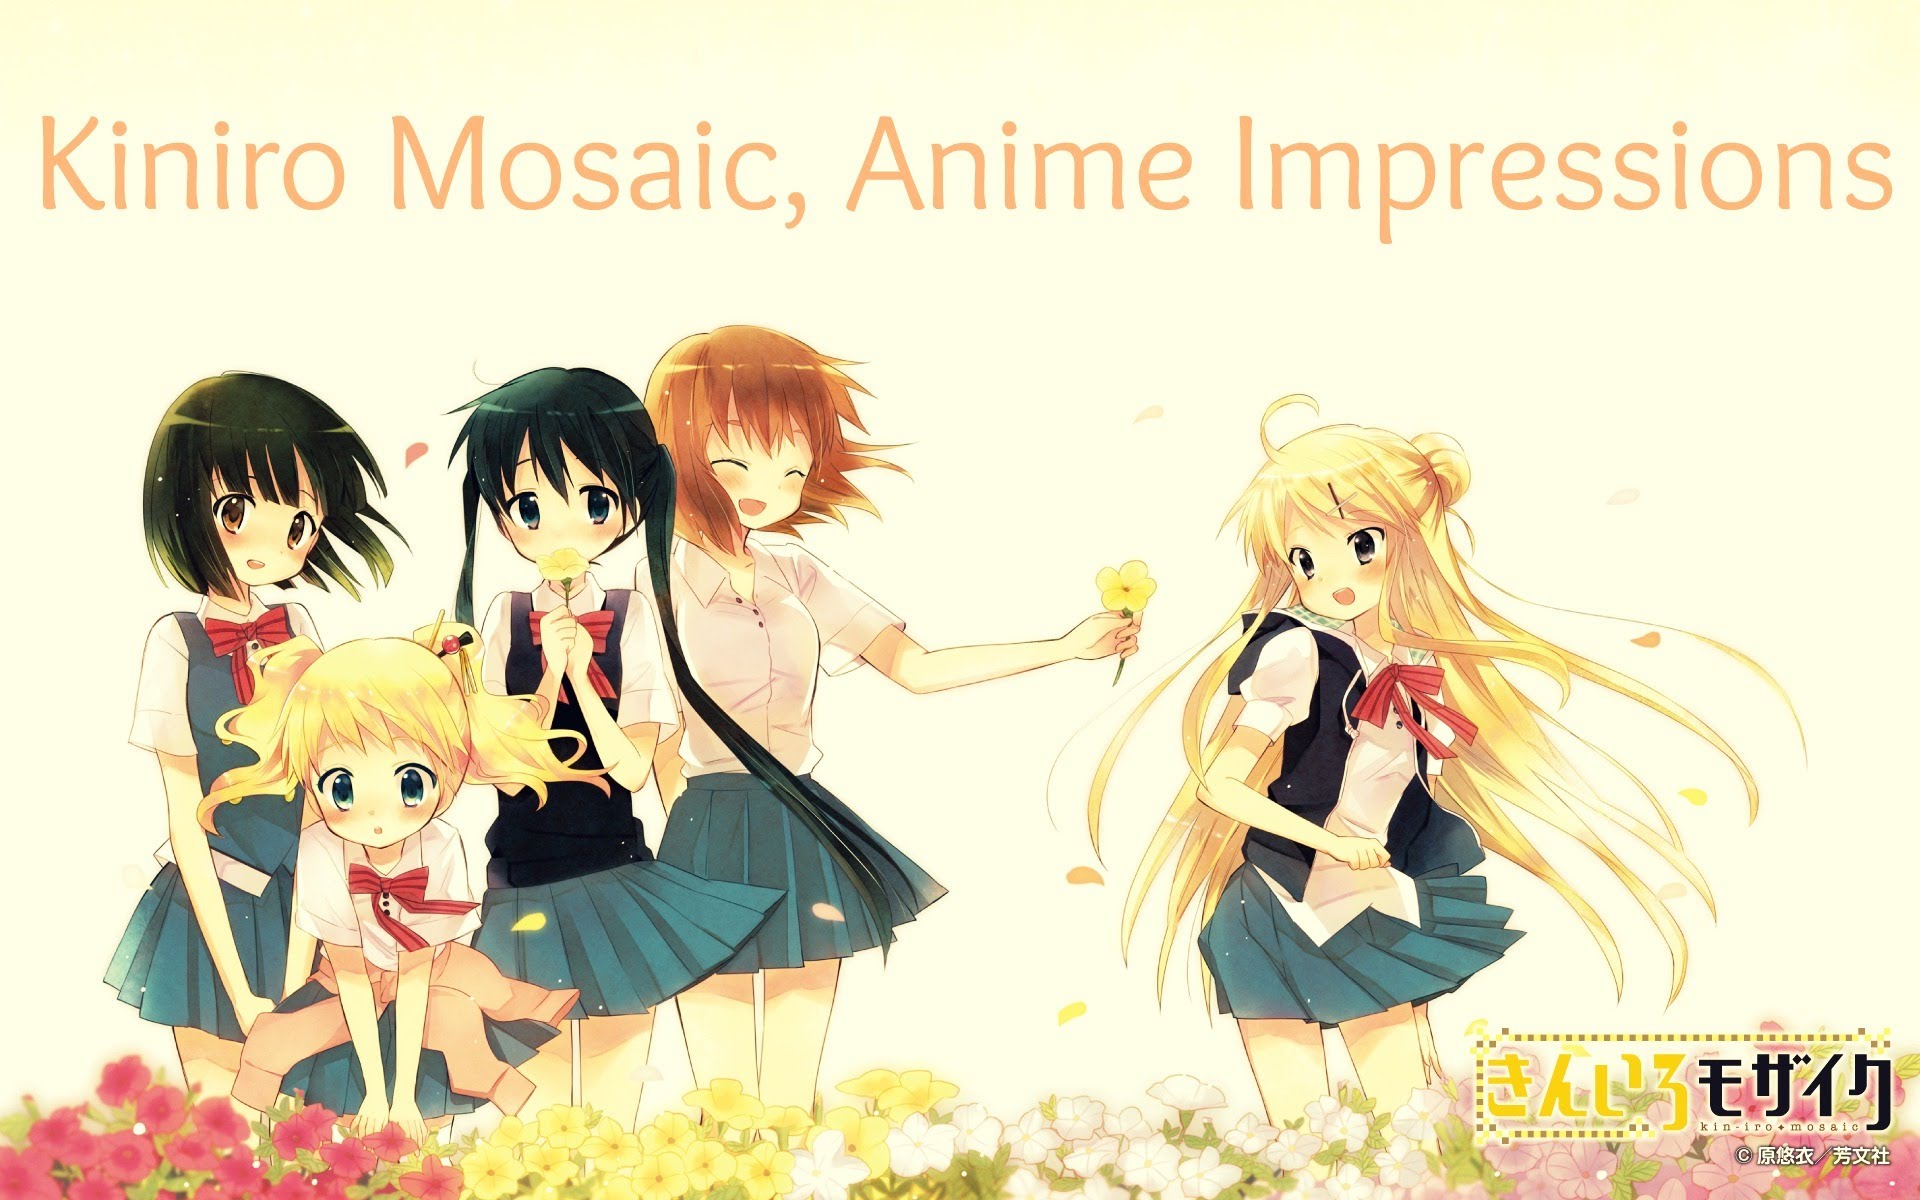 KINMOZA! Backgrounds, Compatible - PC, Mobile, Gadgets| 1920x1200 px